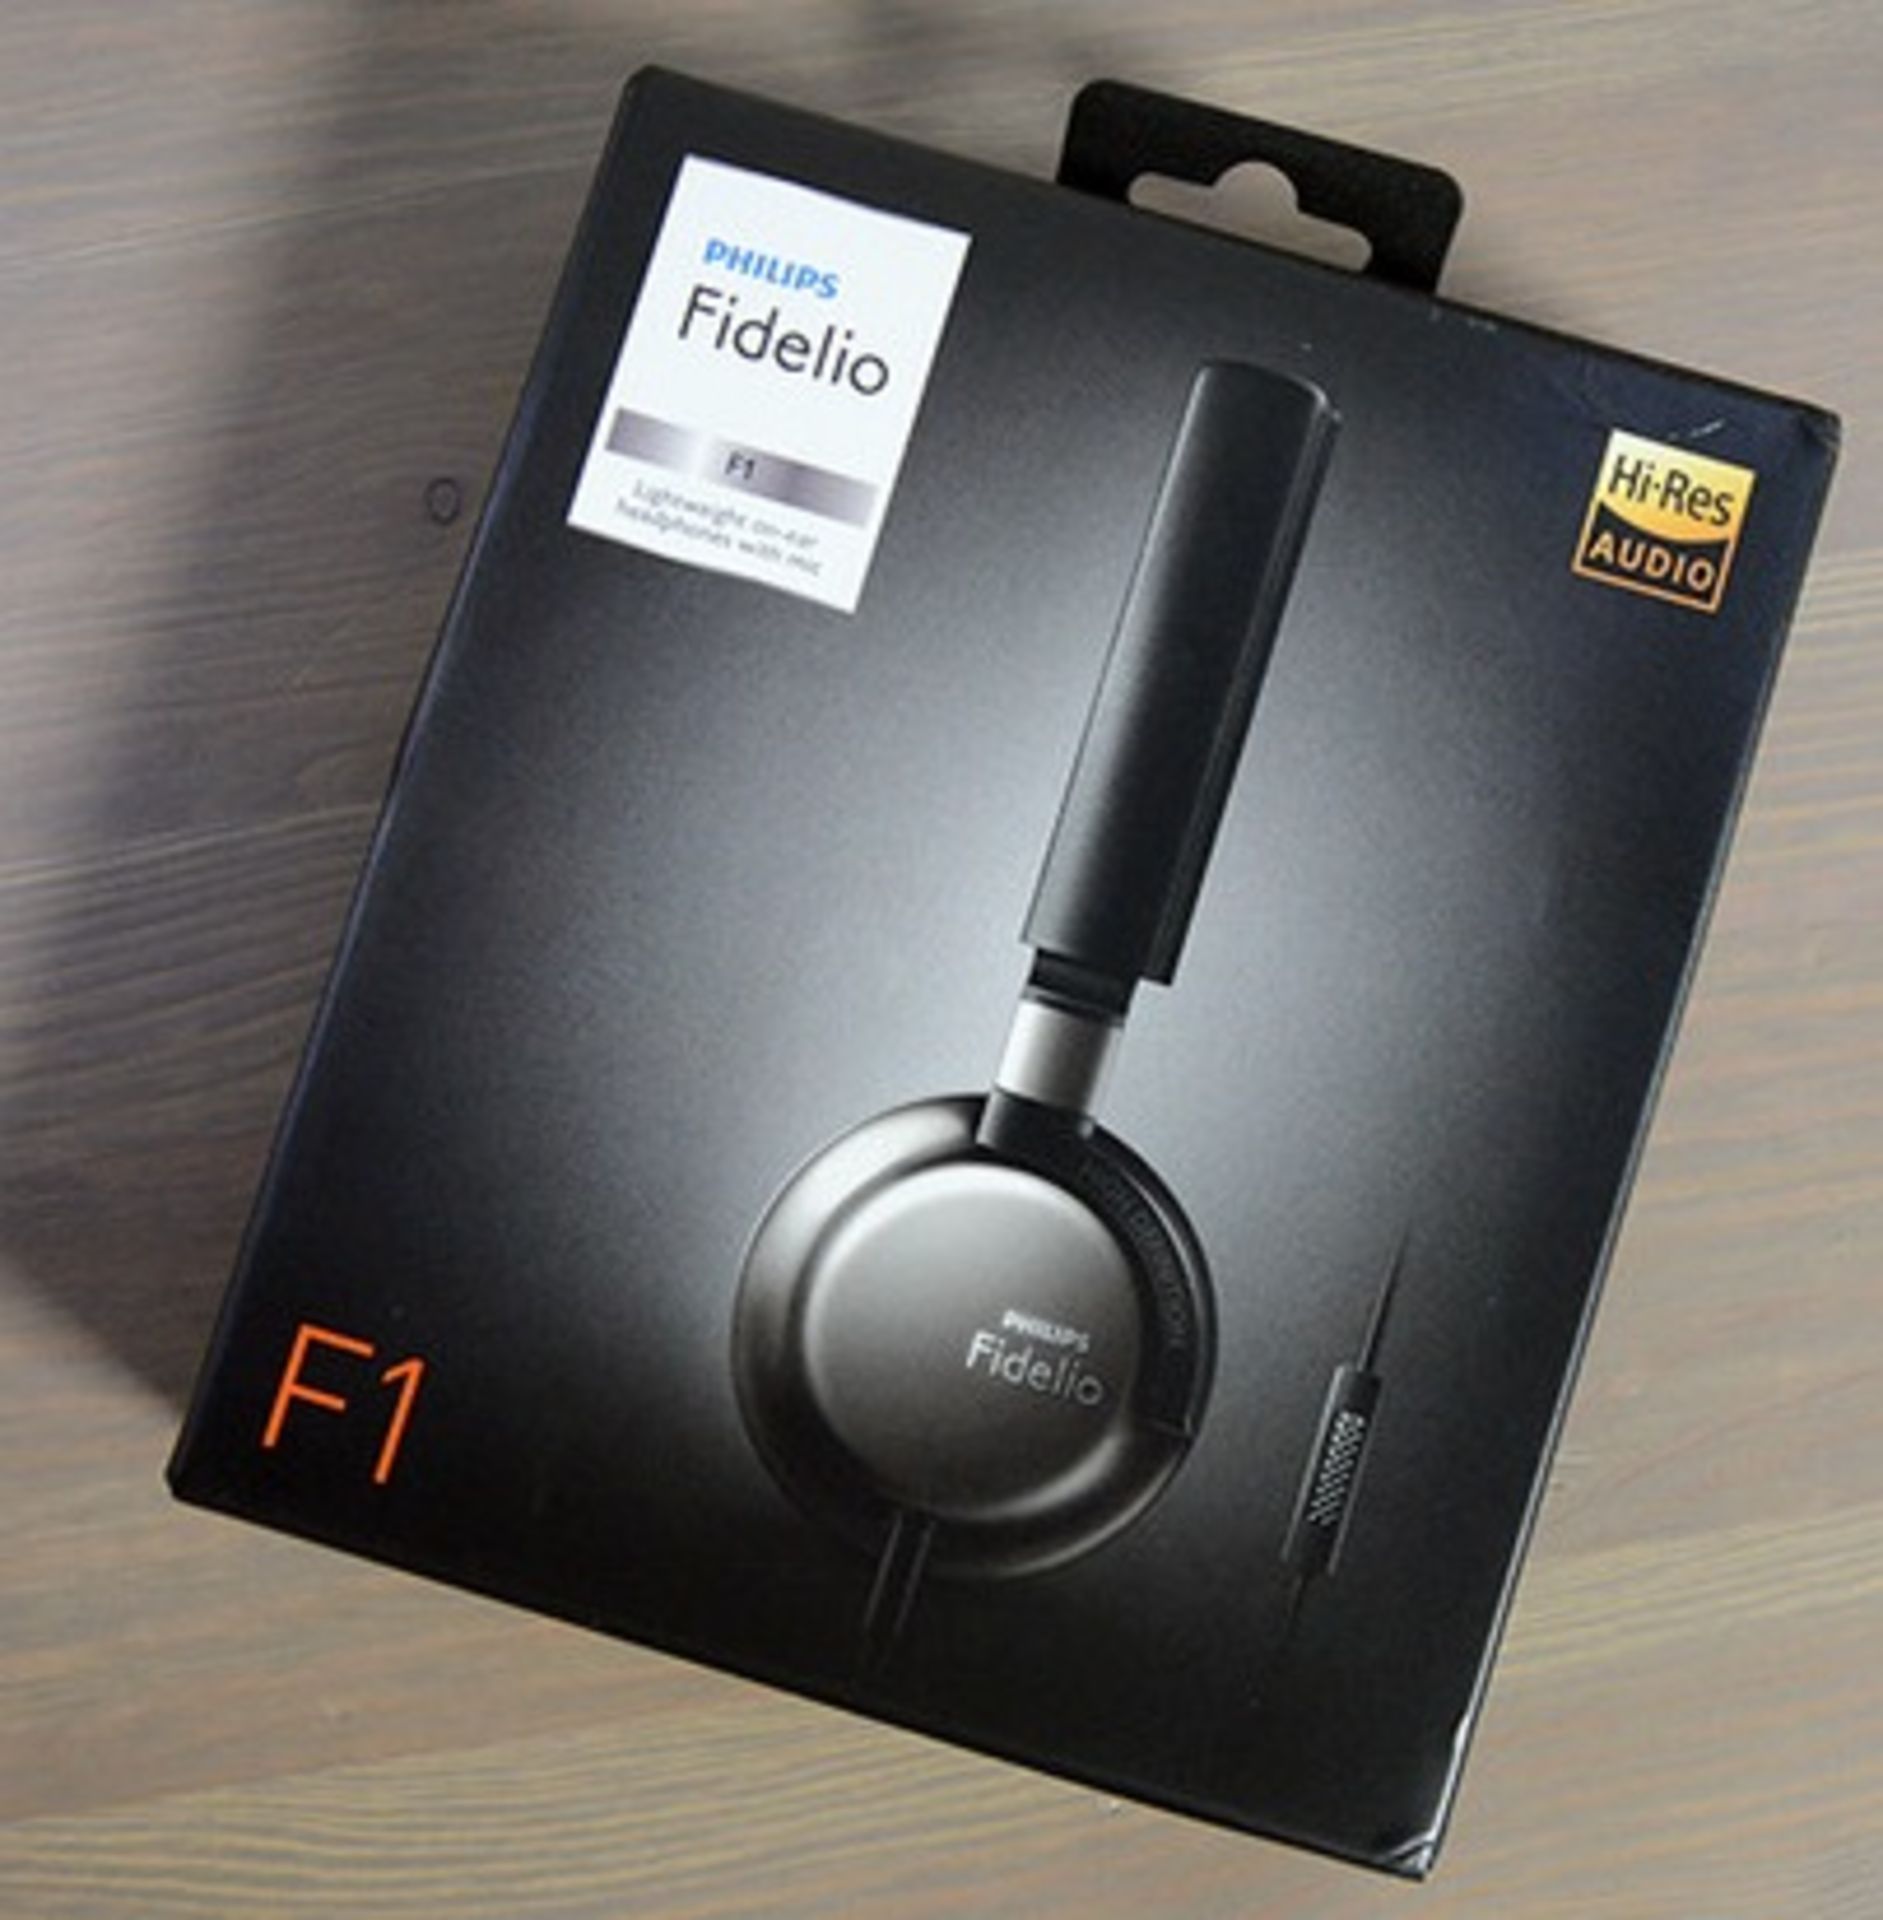 V *TRADE QTY* Brand New Philips Fidelio F1 Lightweight On-Ear Headphones With Microphone With Hi-Res